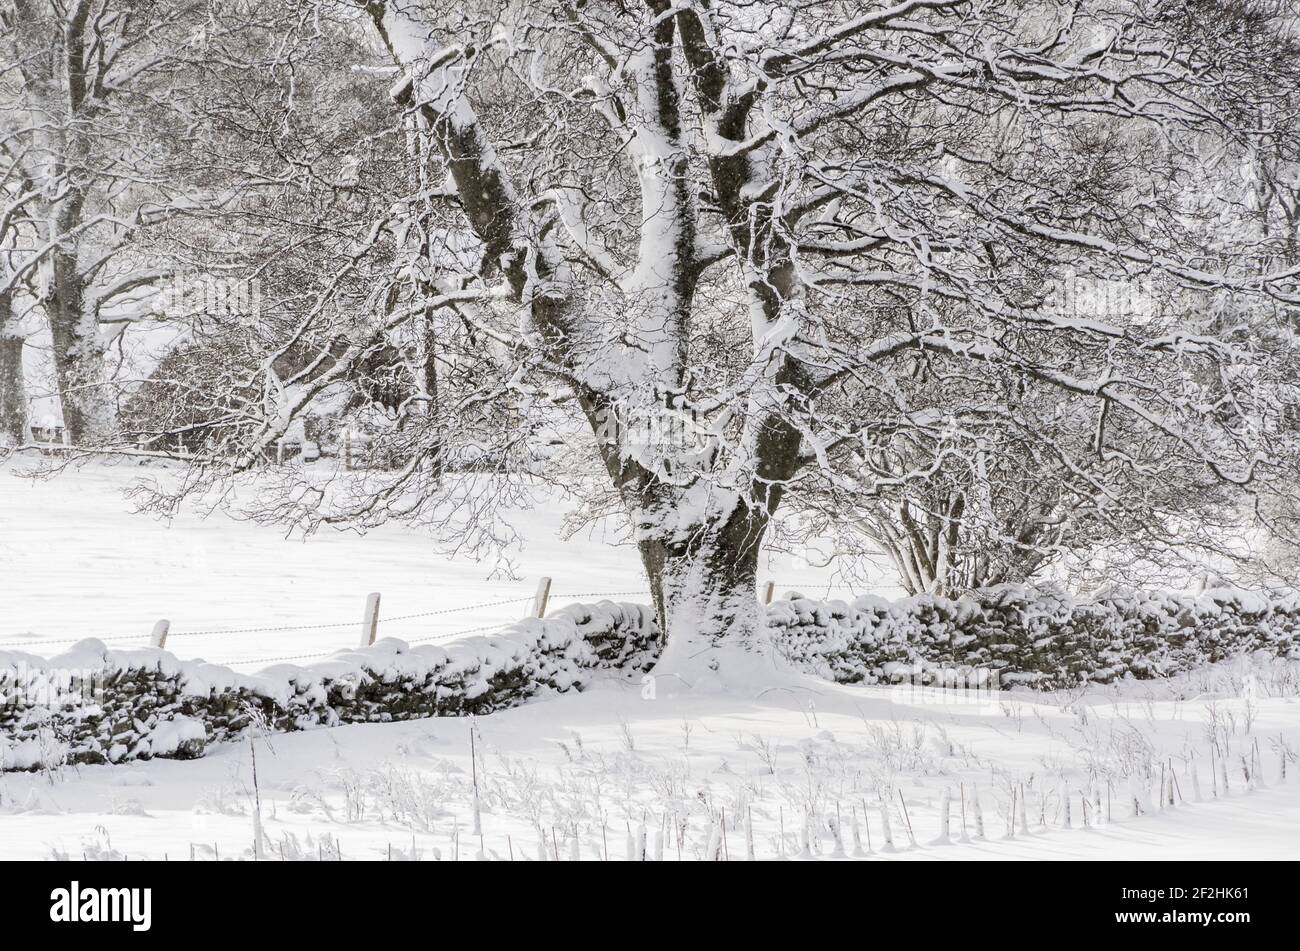 A sycamore (Acer pseudoplatanus) by a dry stone wall covered in snow Weardale, the North Pennines, County Durham, UK Stock Photo